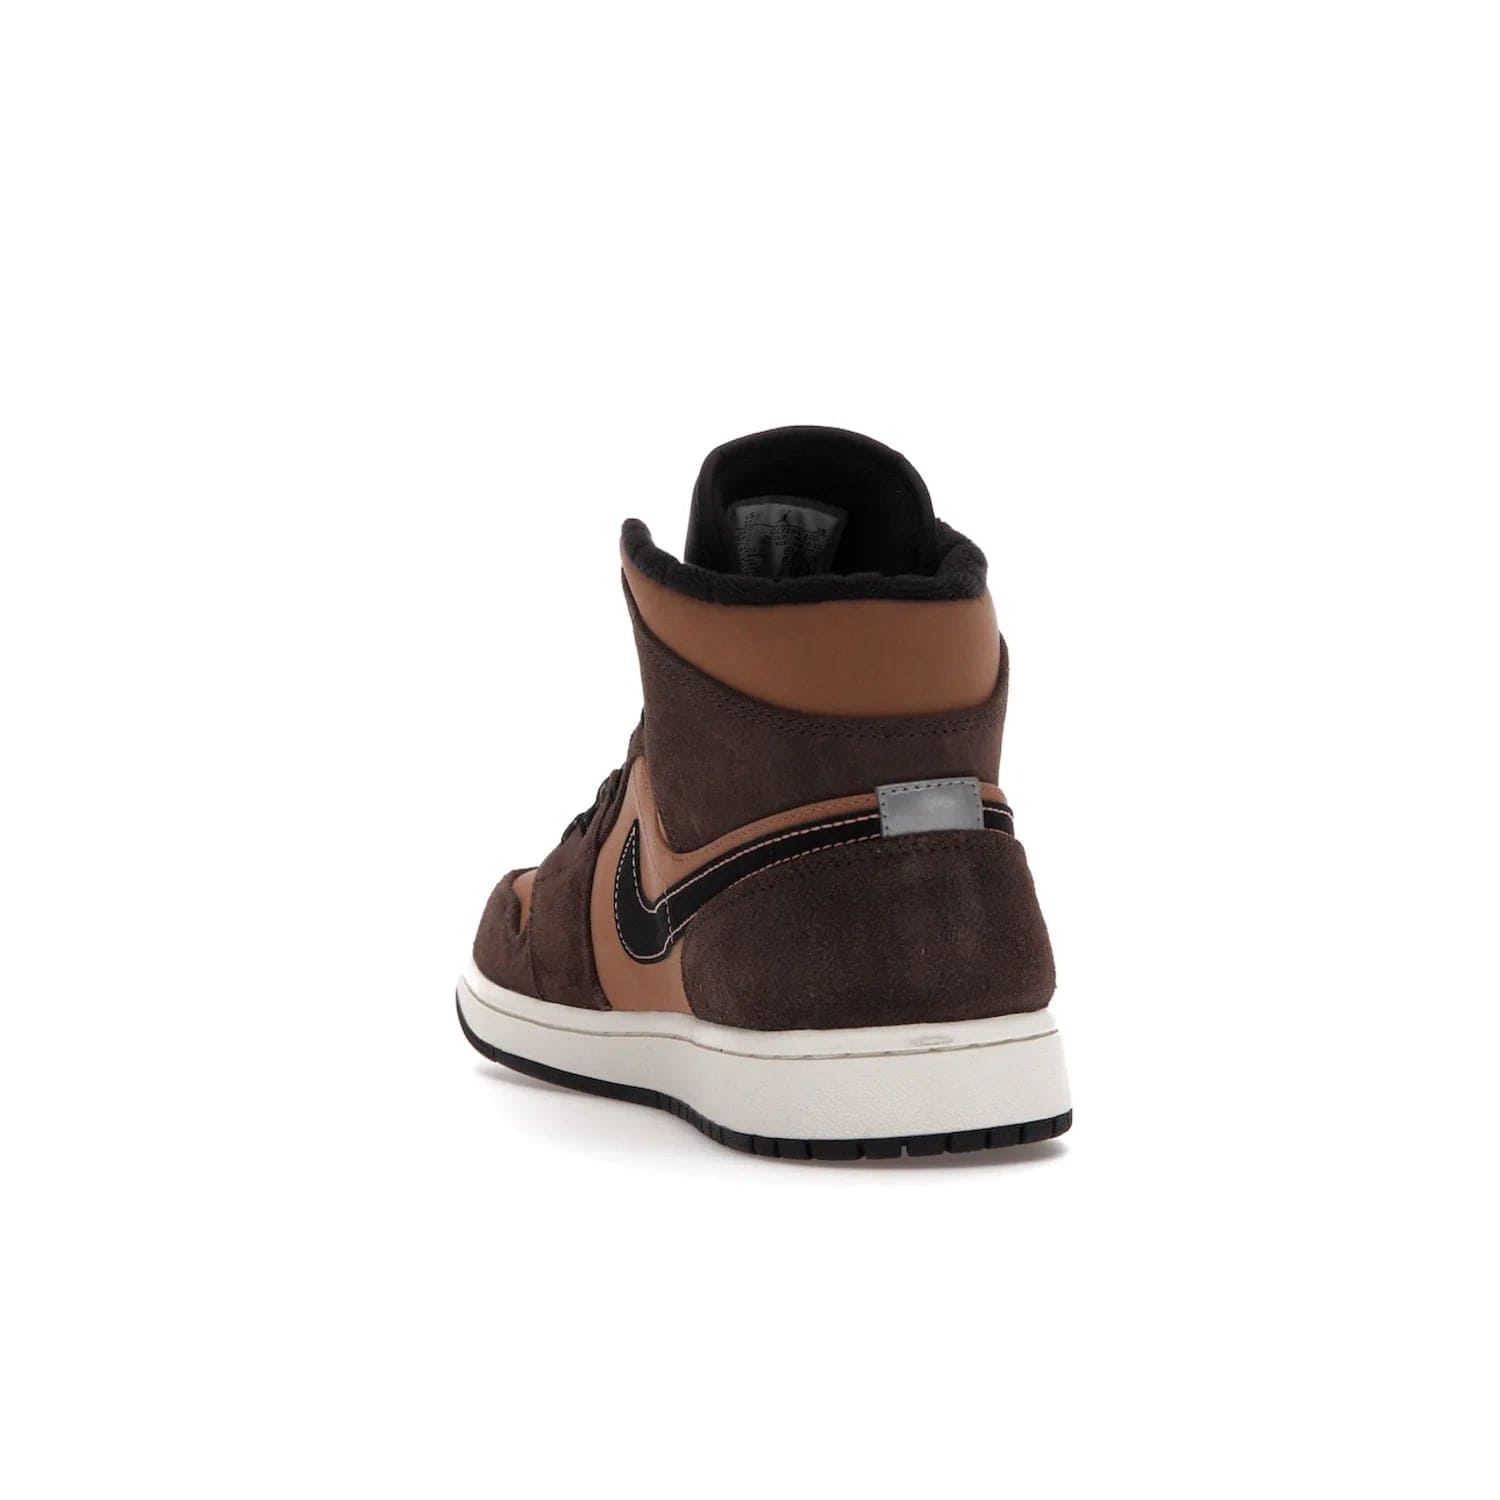 Jordan 1 Mid SE Dark Chocolate - Image 26 - Only at www.BallersClubKickz.com - This fashionable and functional Jordan 1 Mid SE Dark Chocolate features a light brown Durabuck upper, dark brown suede overlays, black Swoosh logos and reflective patch at heel. A must-have for any sneakerhead!